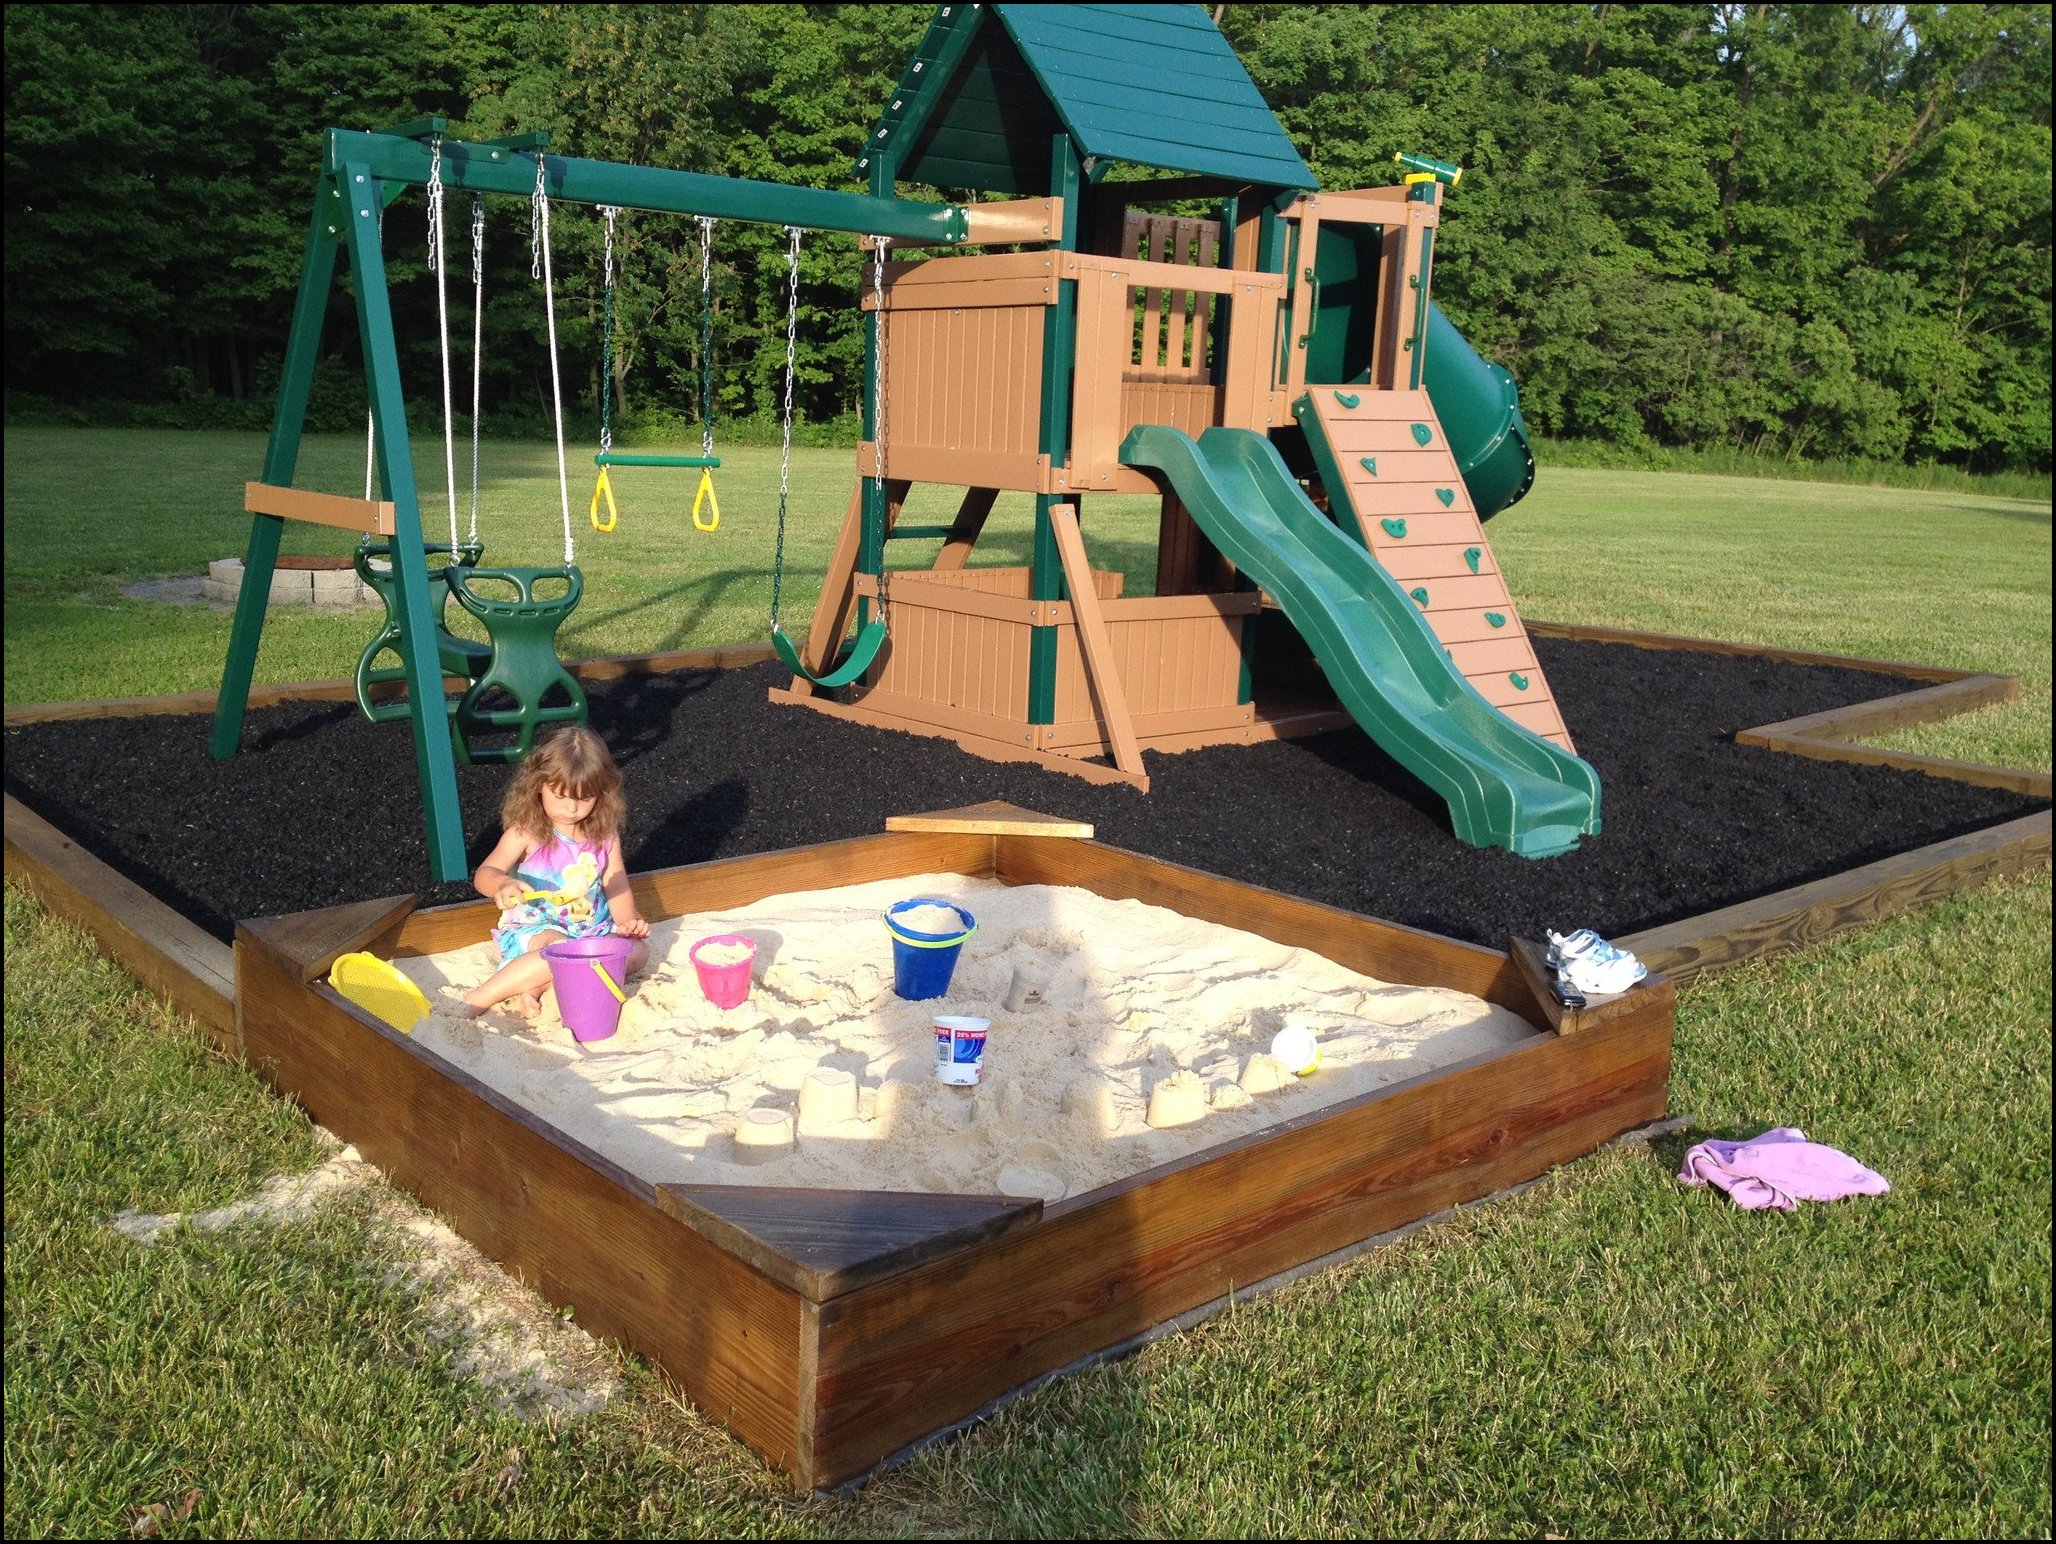 Rubber Mulch For Playground